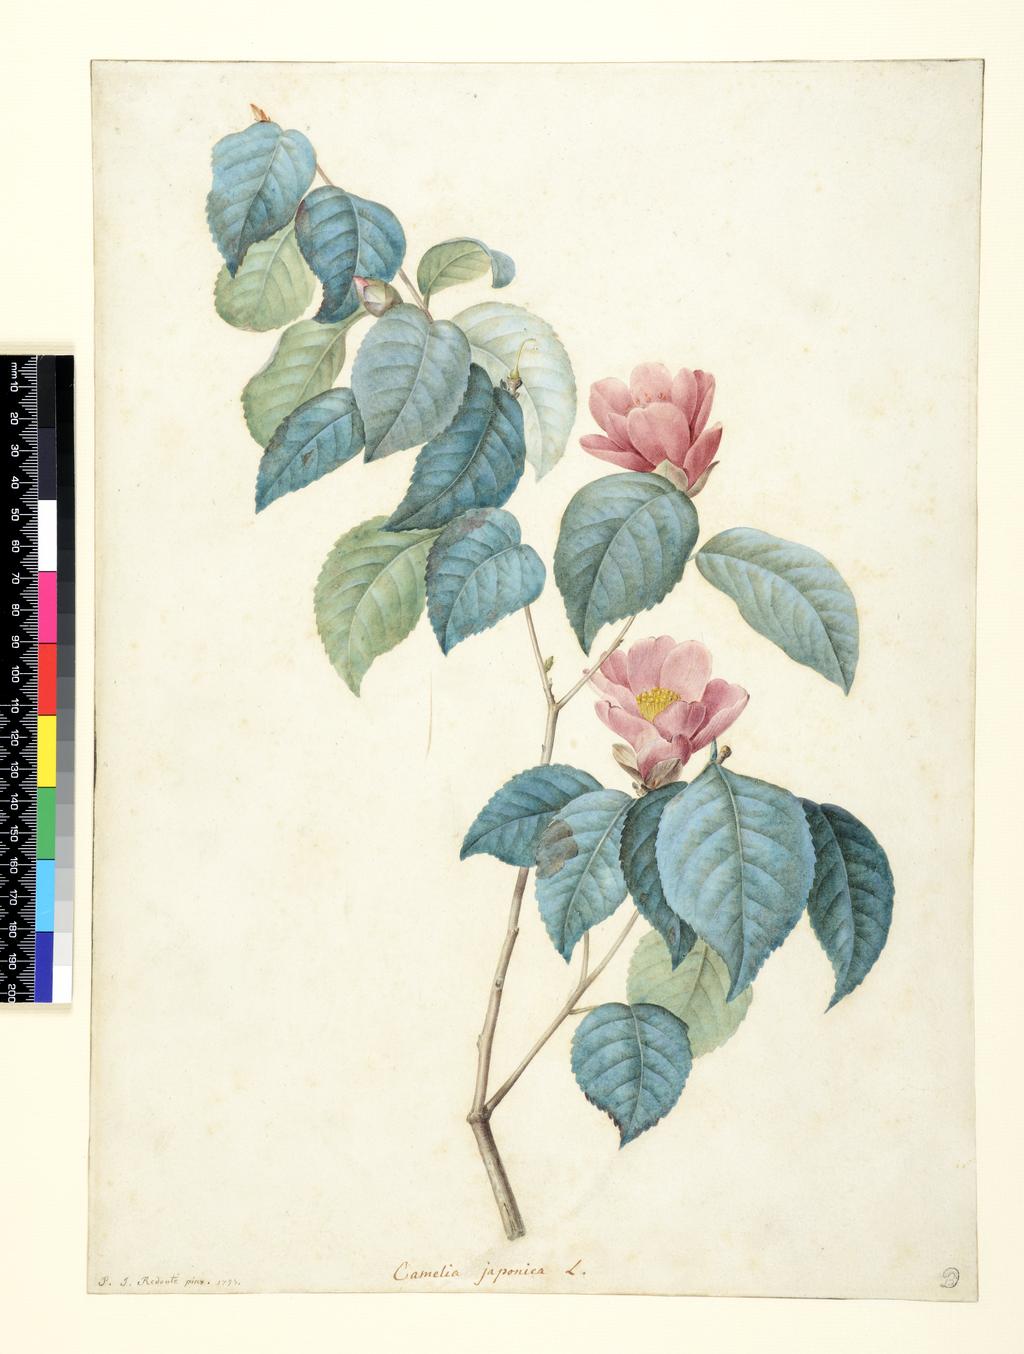 An image of Camellia Japonica. Redouté, Pierre Joseph (Flemish, 1759-1840). Watercolour and bodycolour over graphite on paper, 1793.